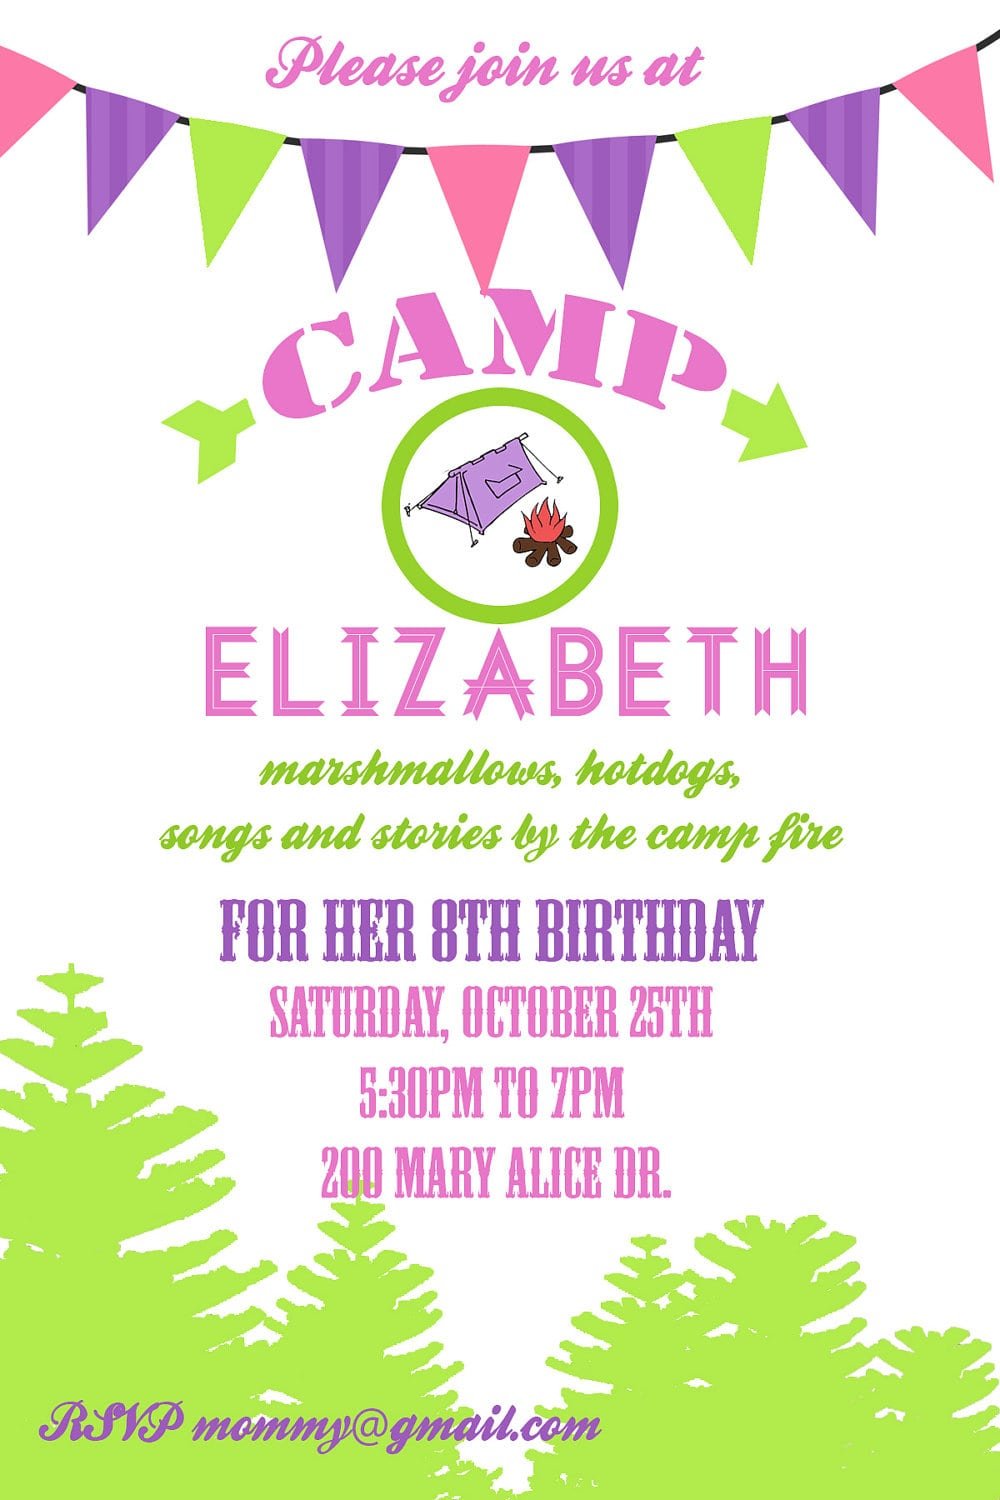 Camping Party Invitation